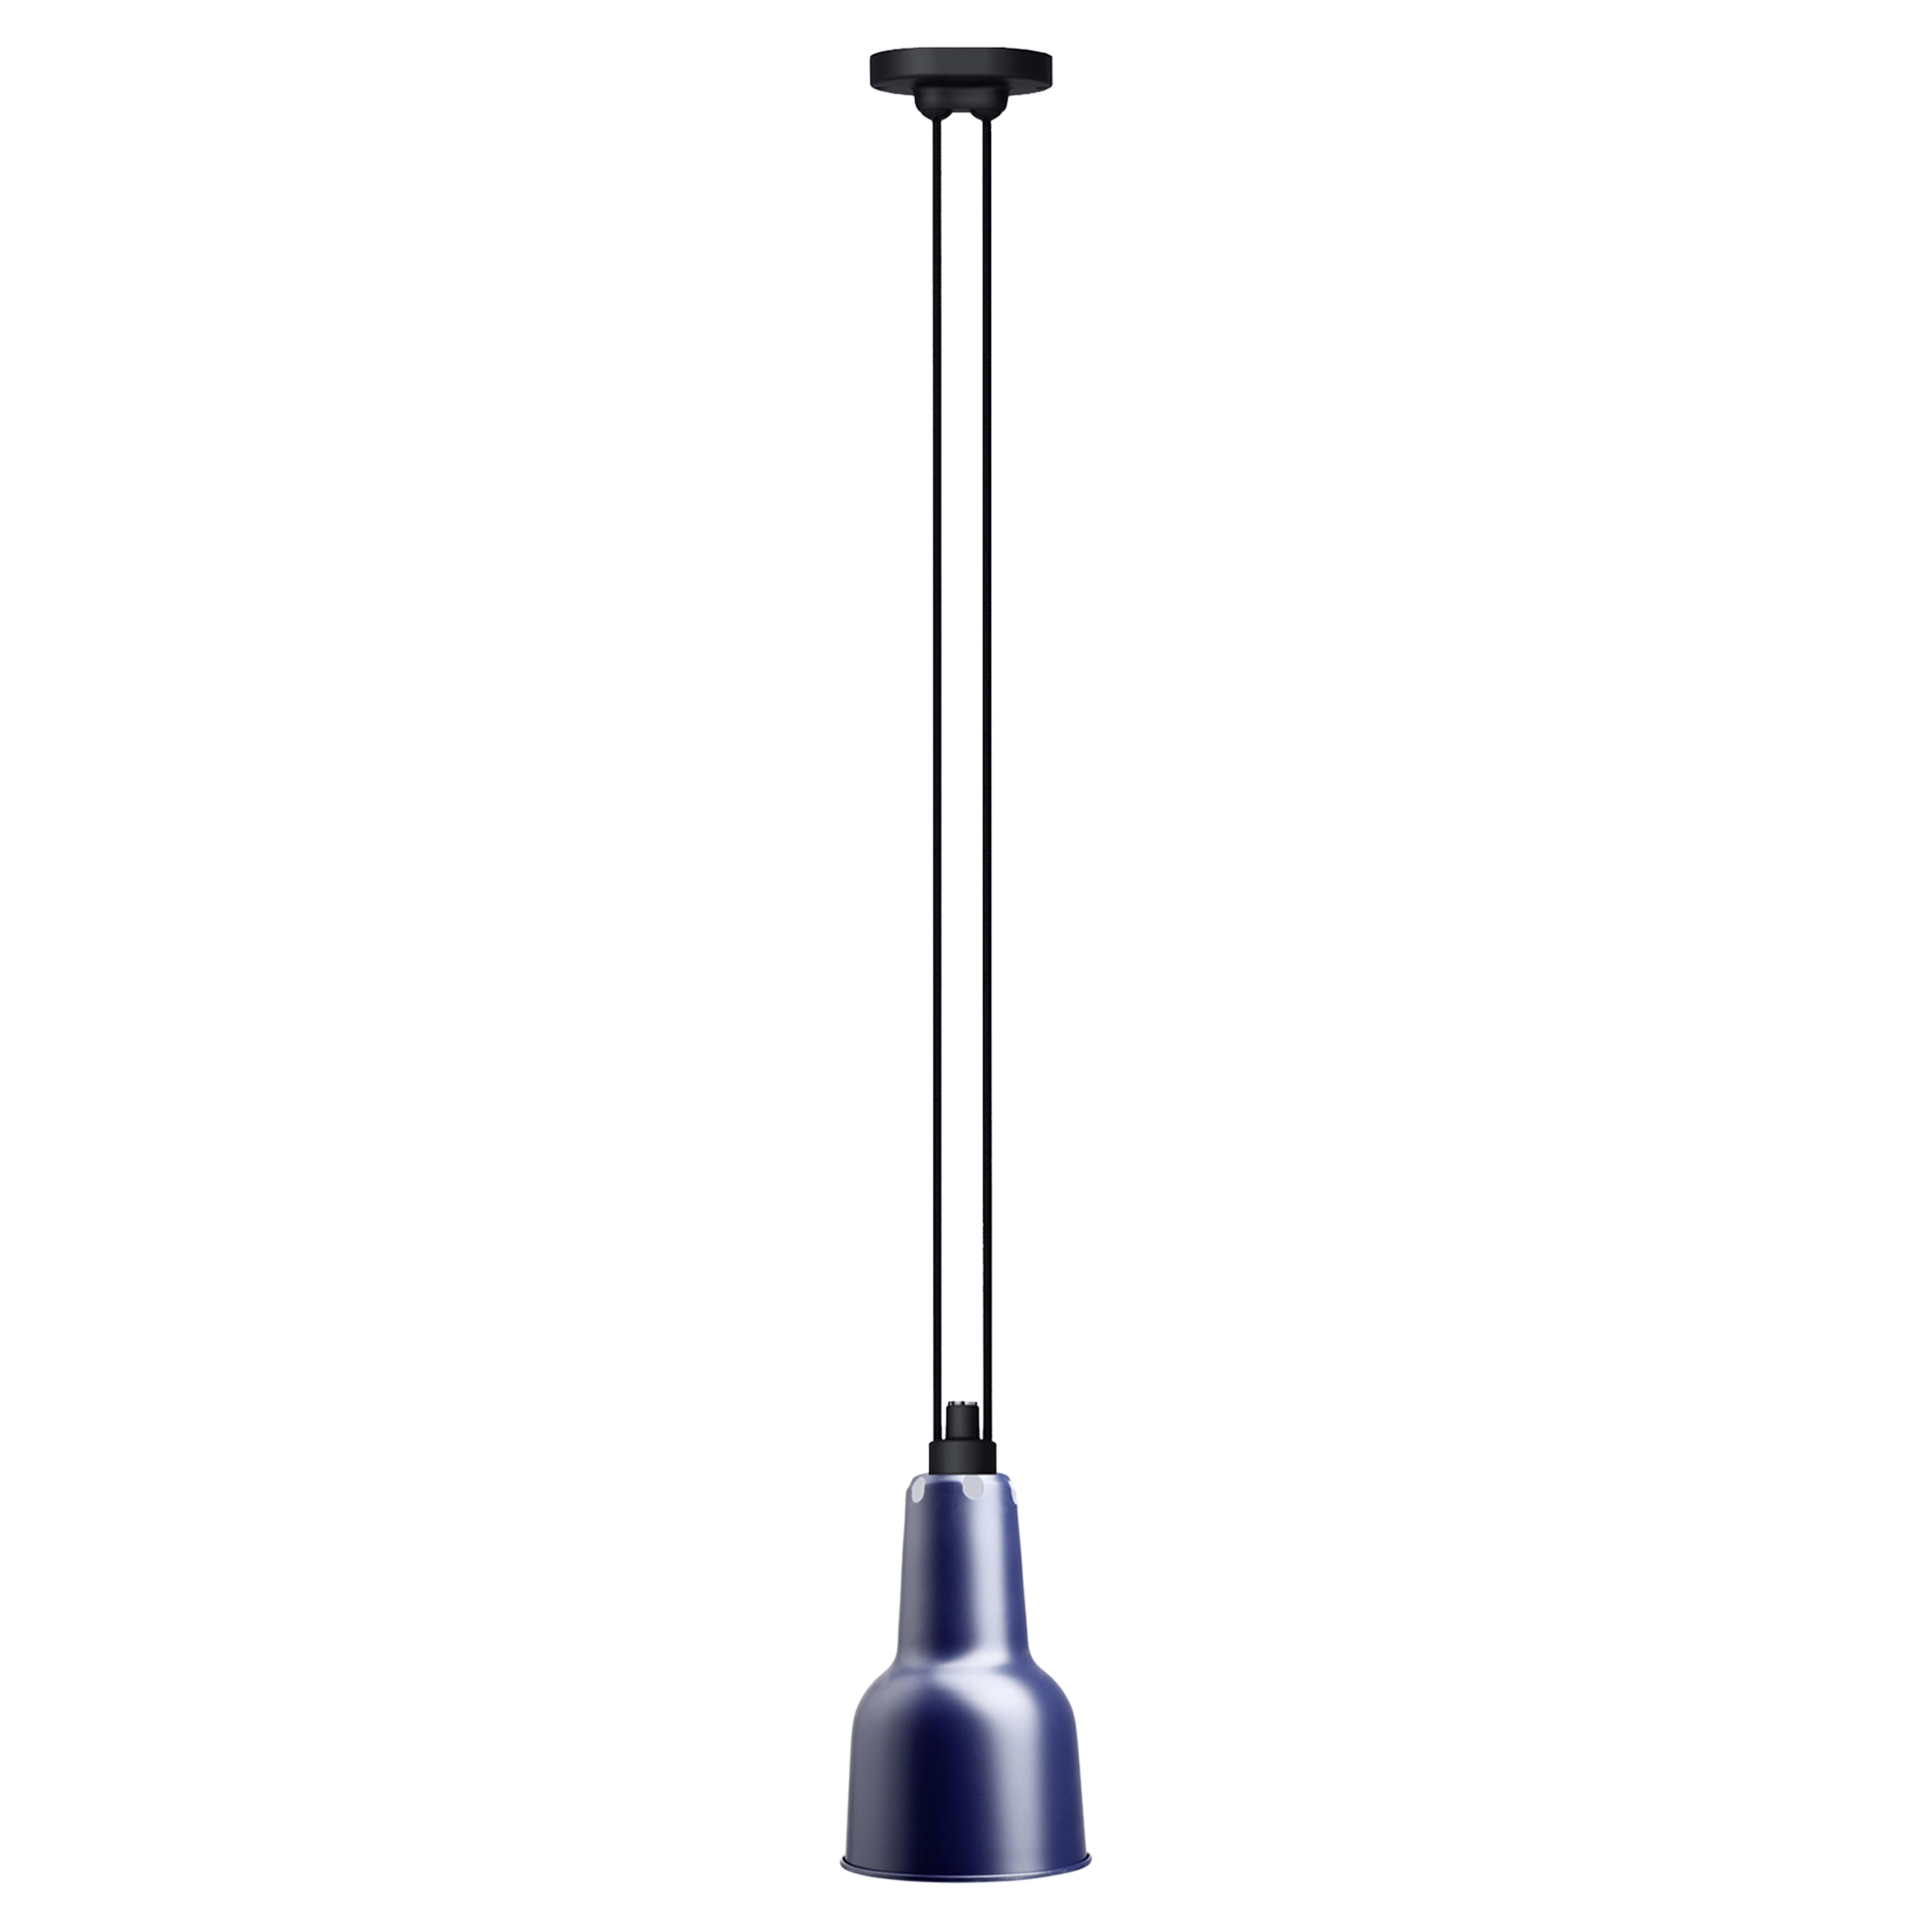 DCW Editions Les Acrobates N°322 Oculist Pendant Lamp in Blue Shade For Sale